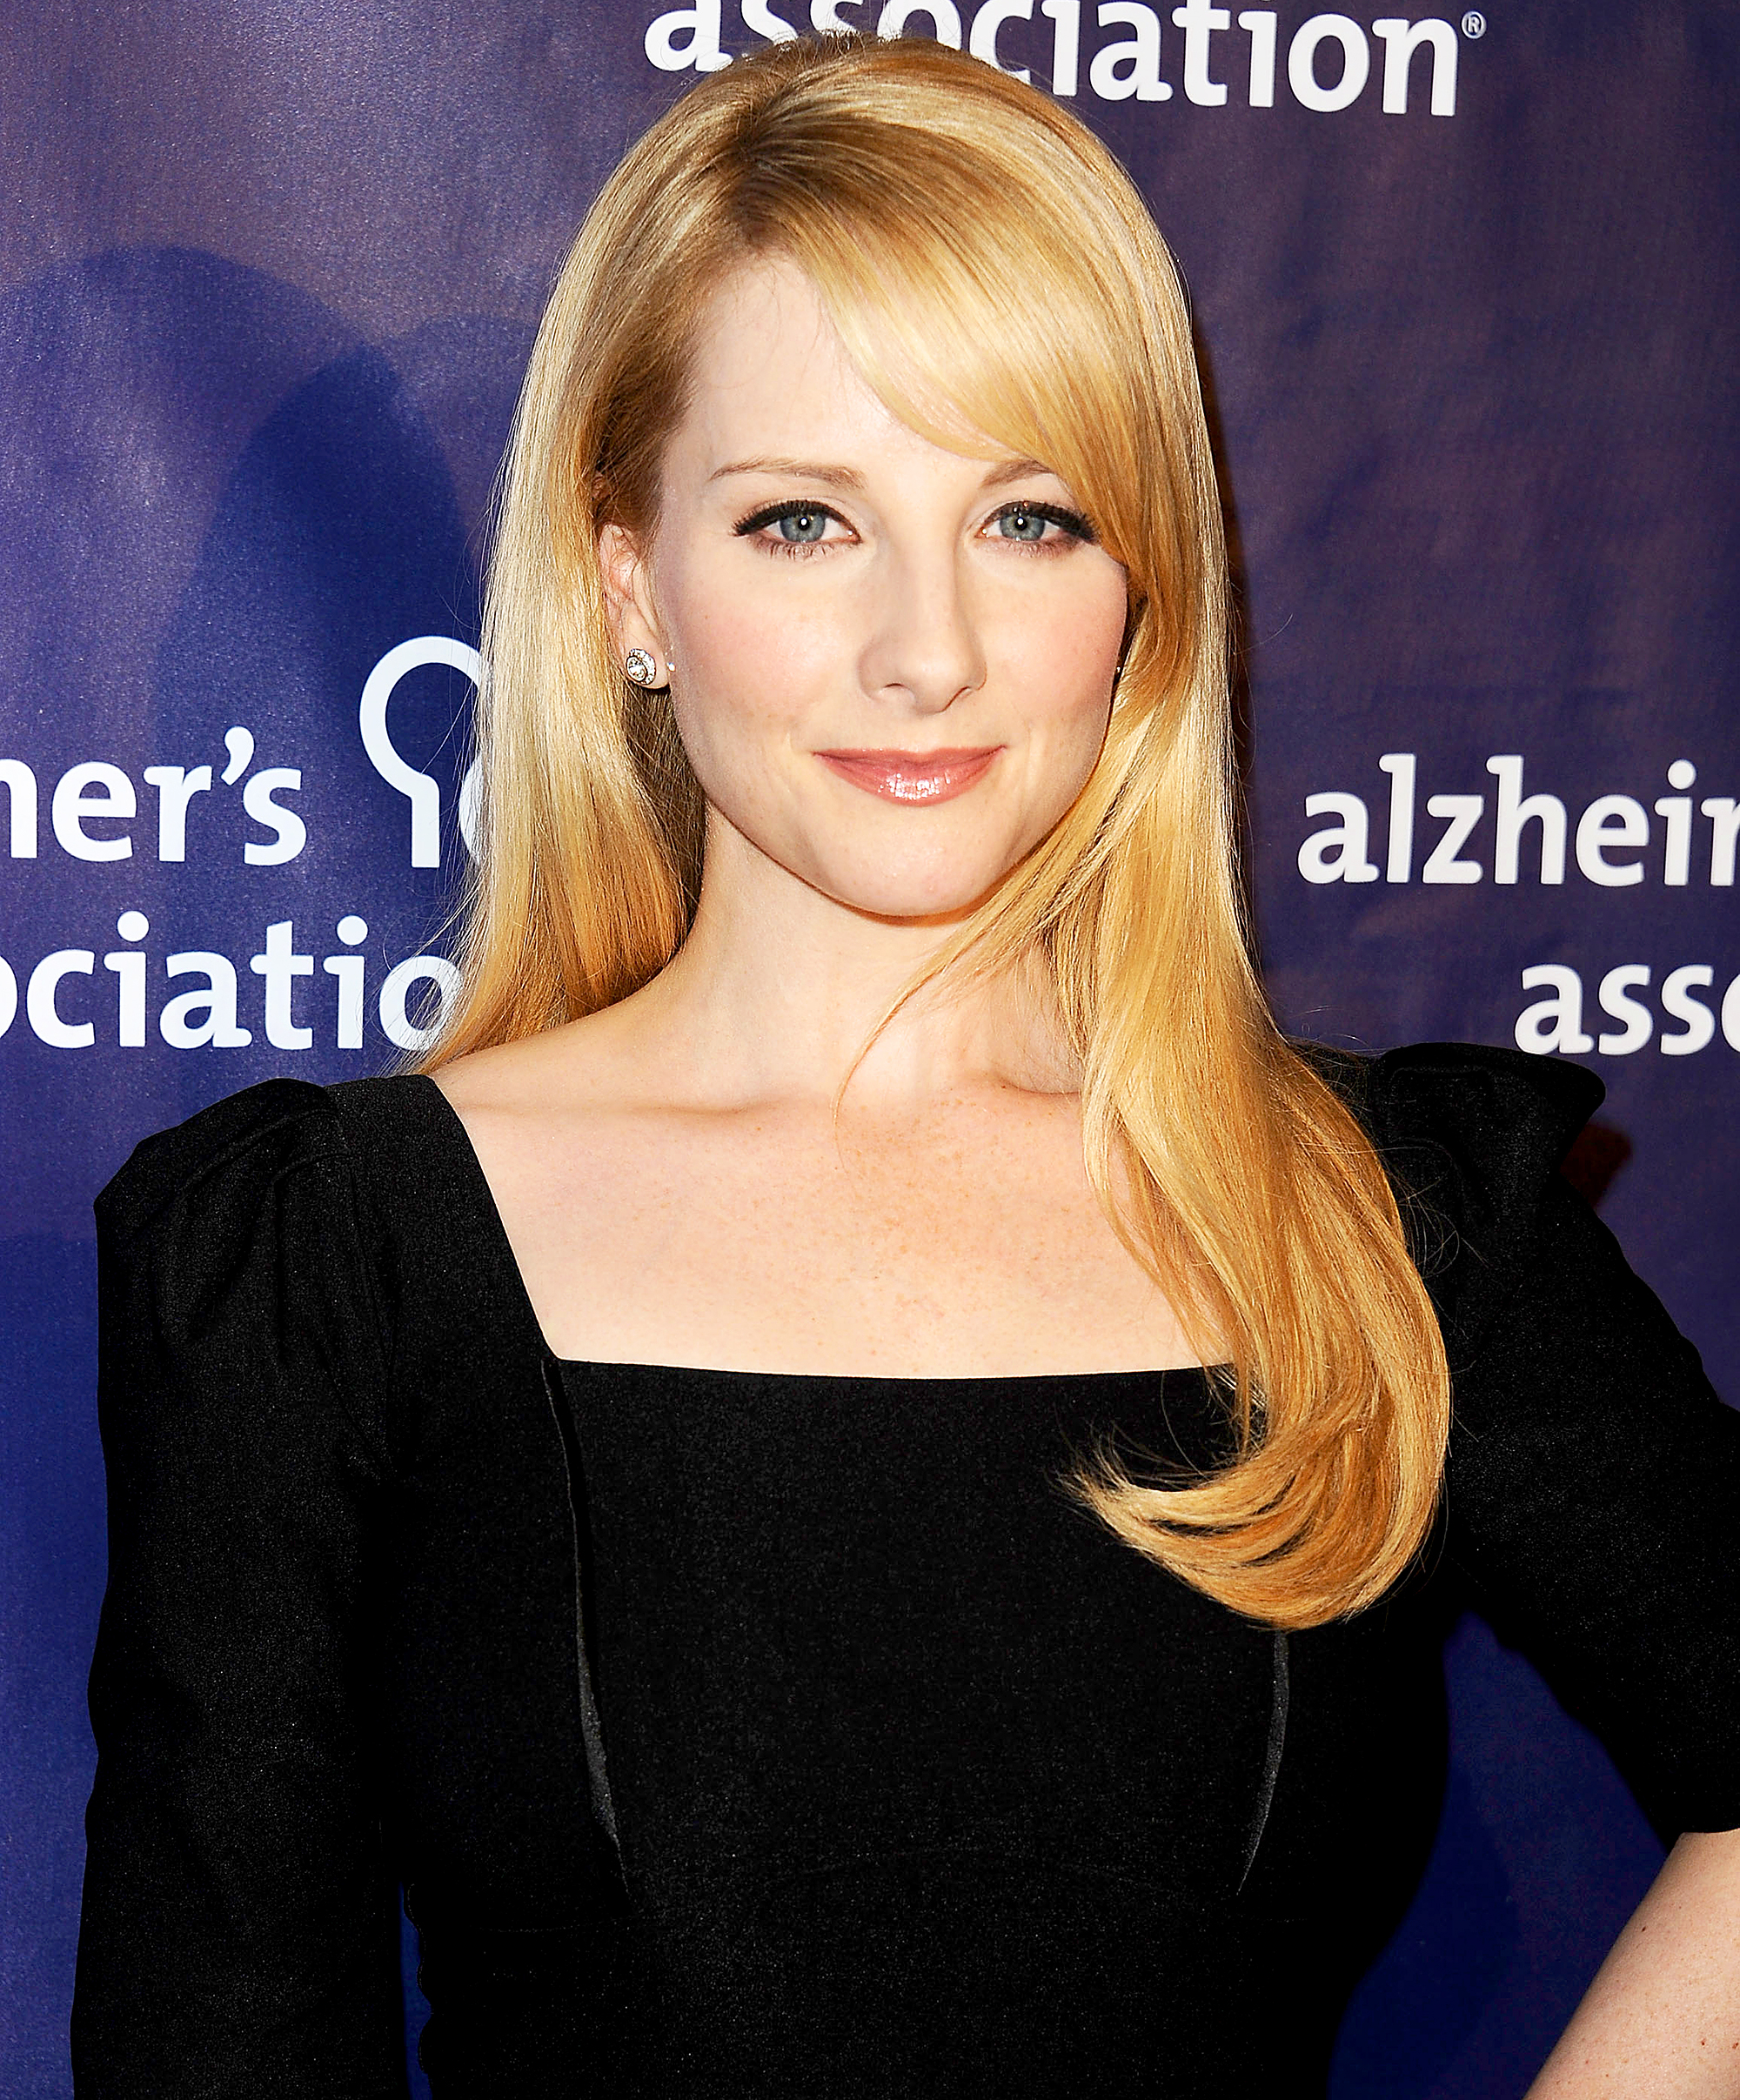 Big Bang Theory' Star Melissa Rauch Is Pregnant After Suffering Miscarriage